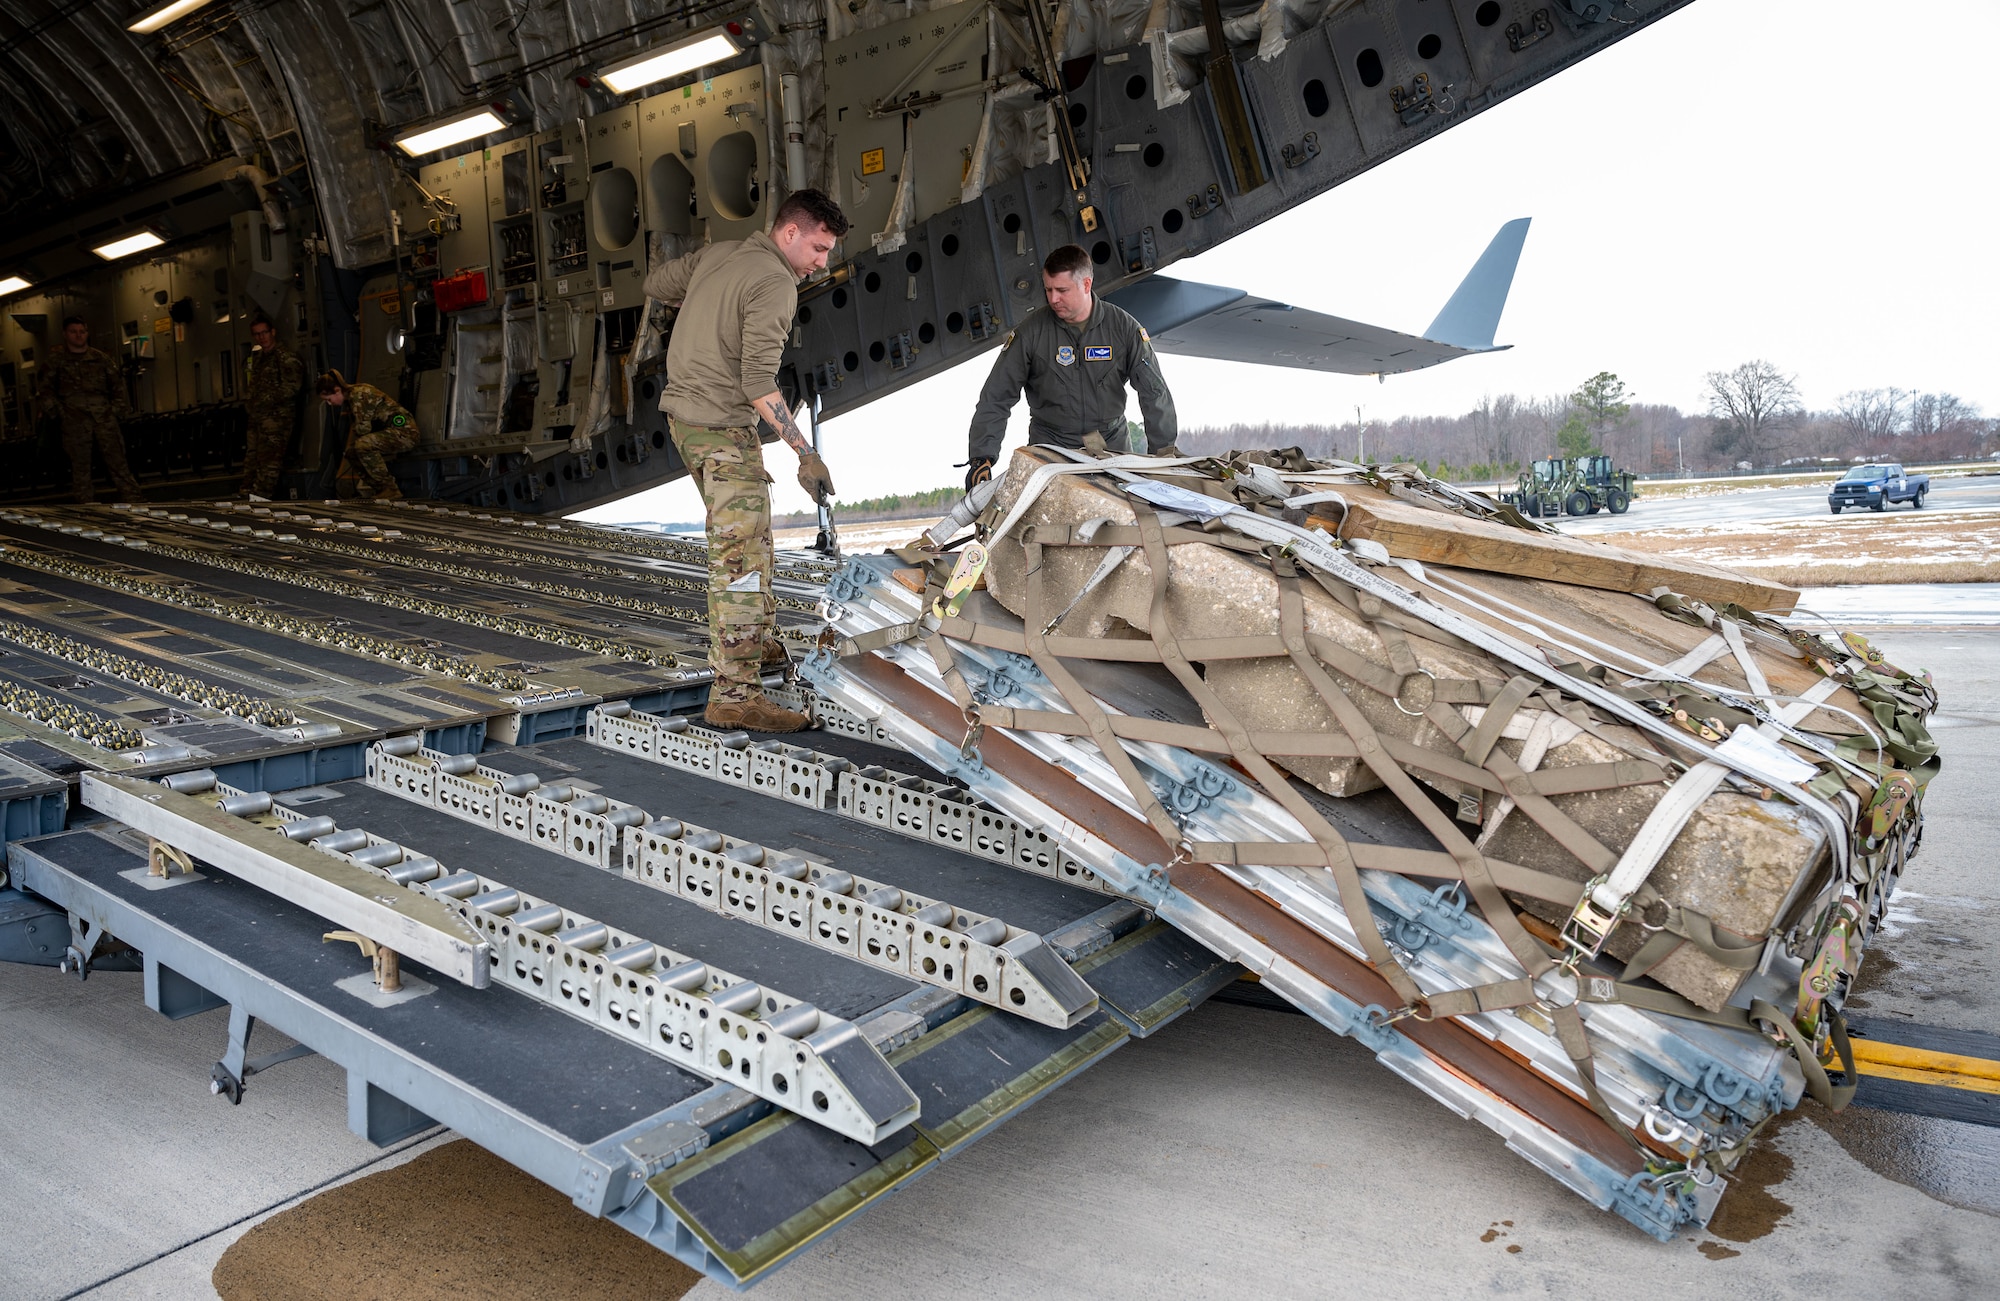 U.S. Air Force Staff Sgt. Jared Soucy, 3rd Airlift Squadron loadmaster, adjusts the winch on a C-17 Globemaster III during combat offload Method C testing at Dover Air Force Base, Delaware, Jan. 23, 2024. The new combat offload Method C would allow C-17s to deliver cargo without the assistance of any material handling equipment. (U.S. Air Force photo by Airman 1st Class Amanda Jett)